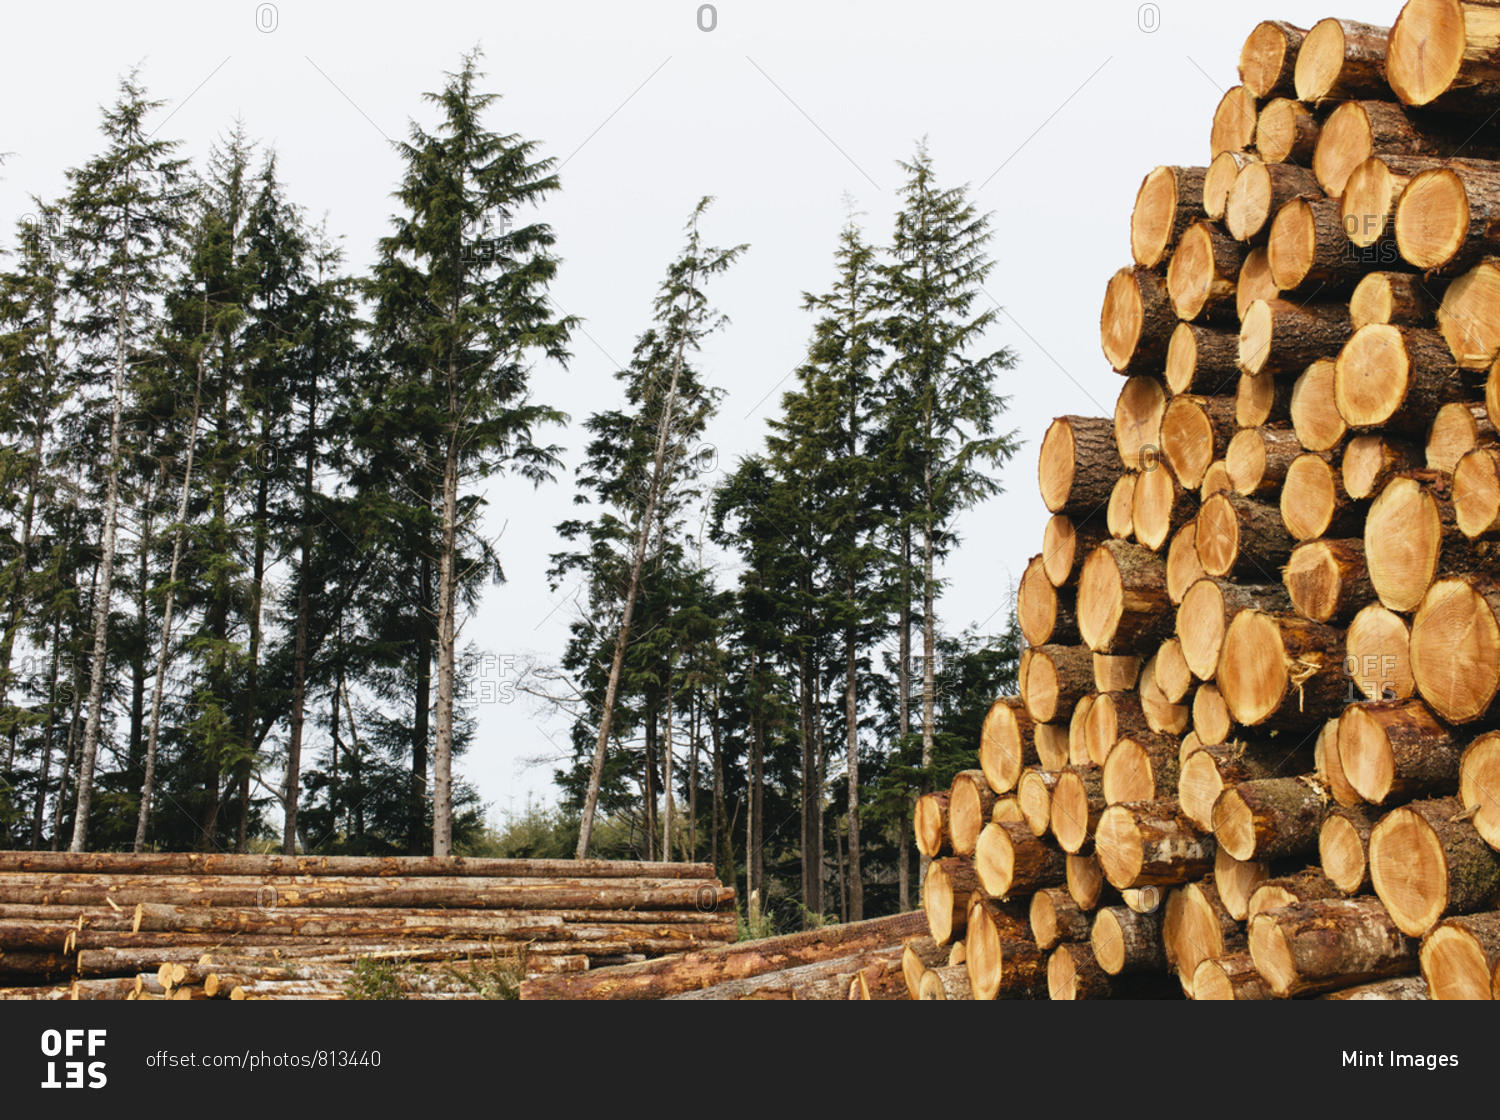 Stacked logs, freshly logged spruce, hemlock and fir trees